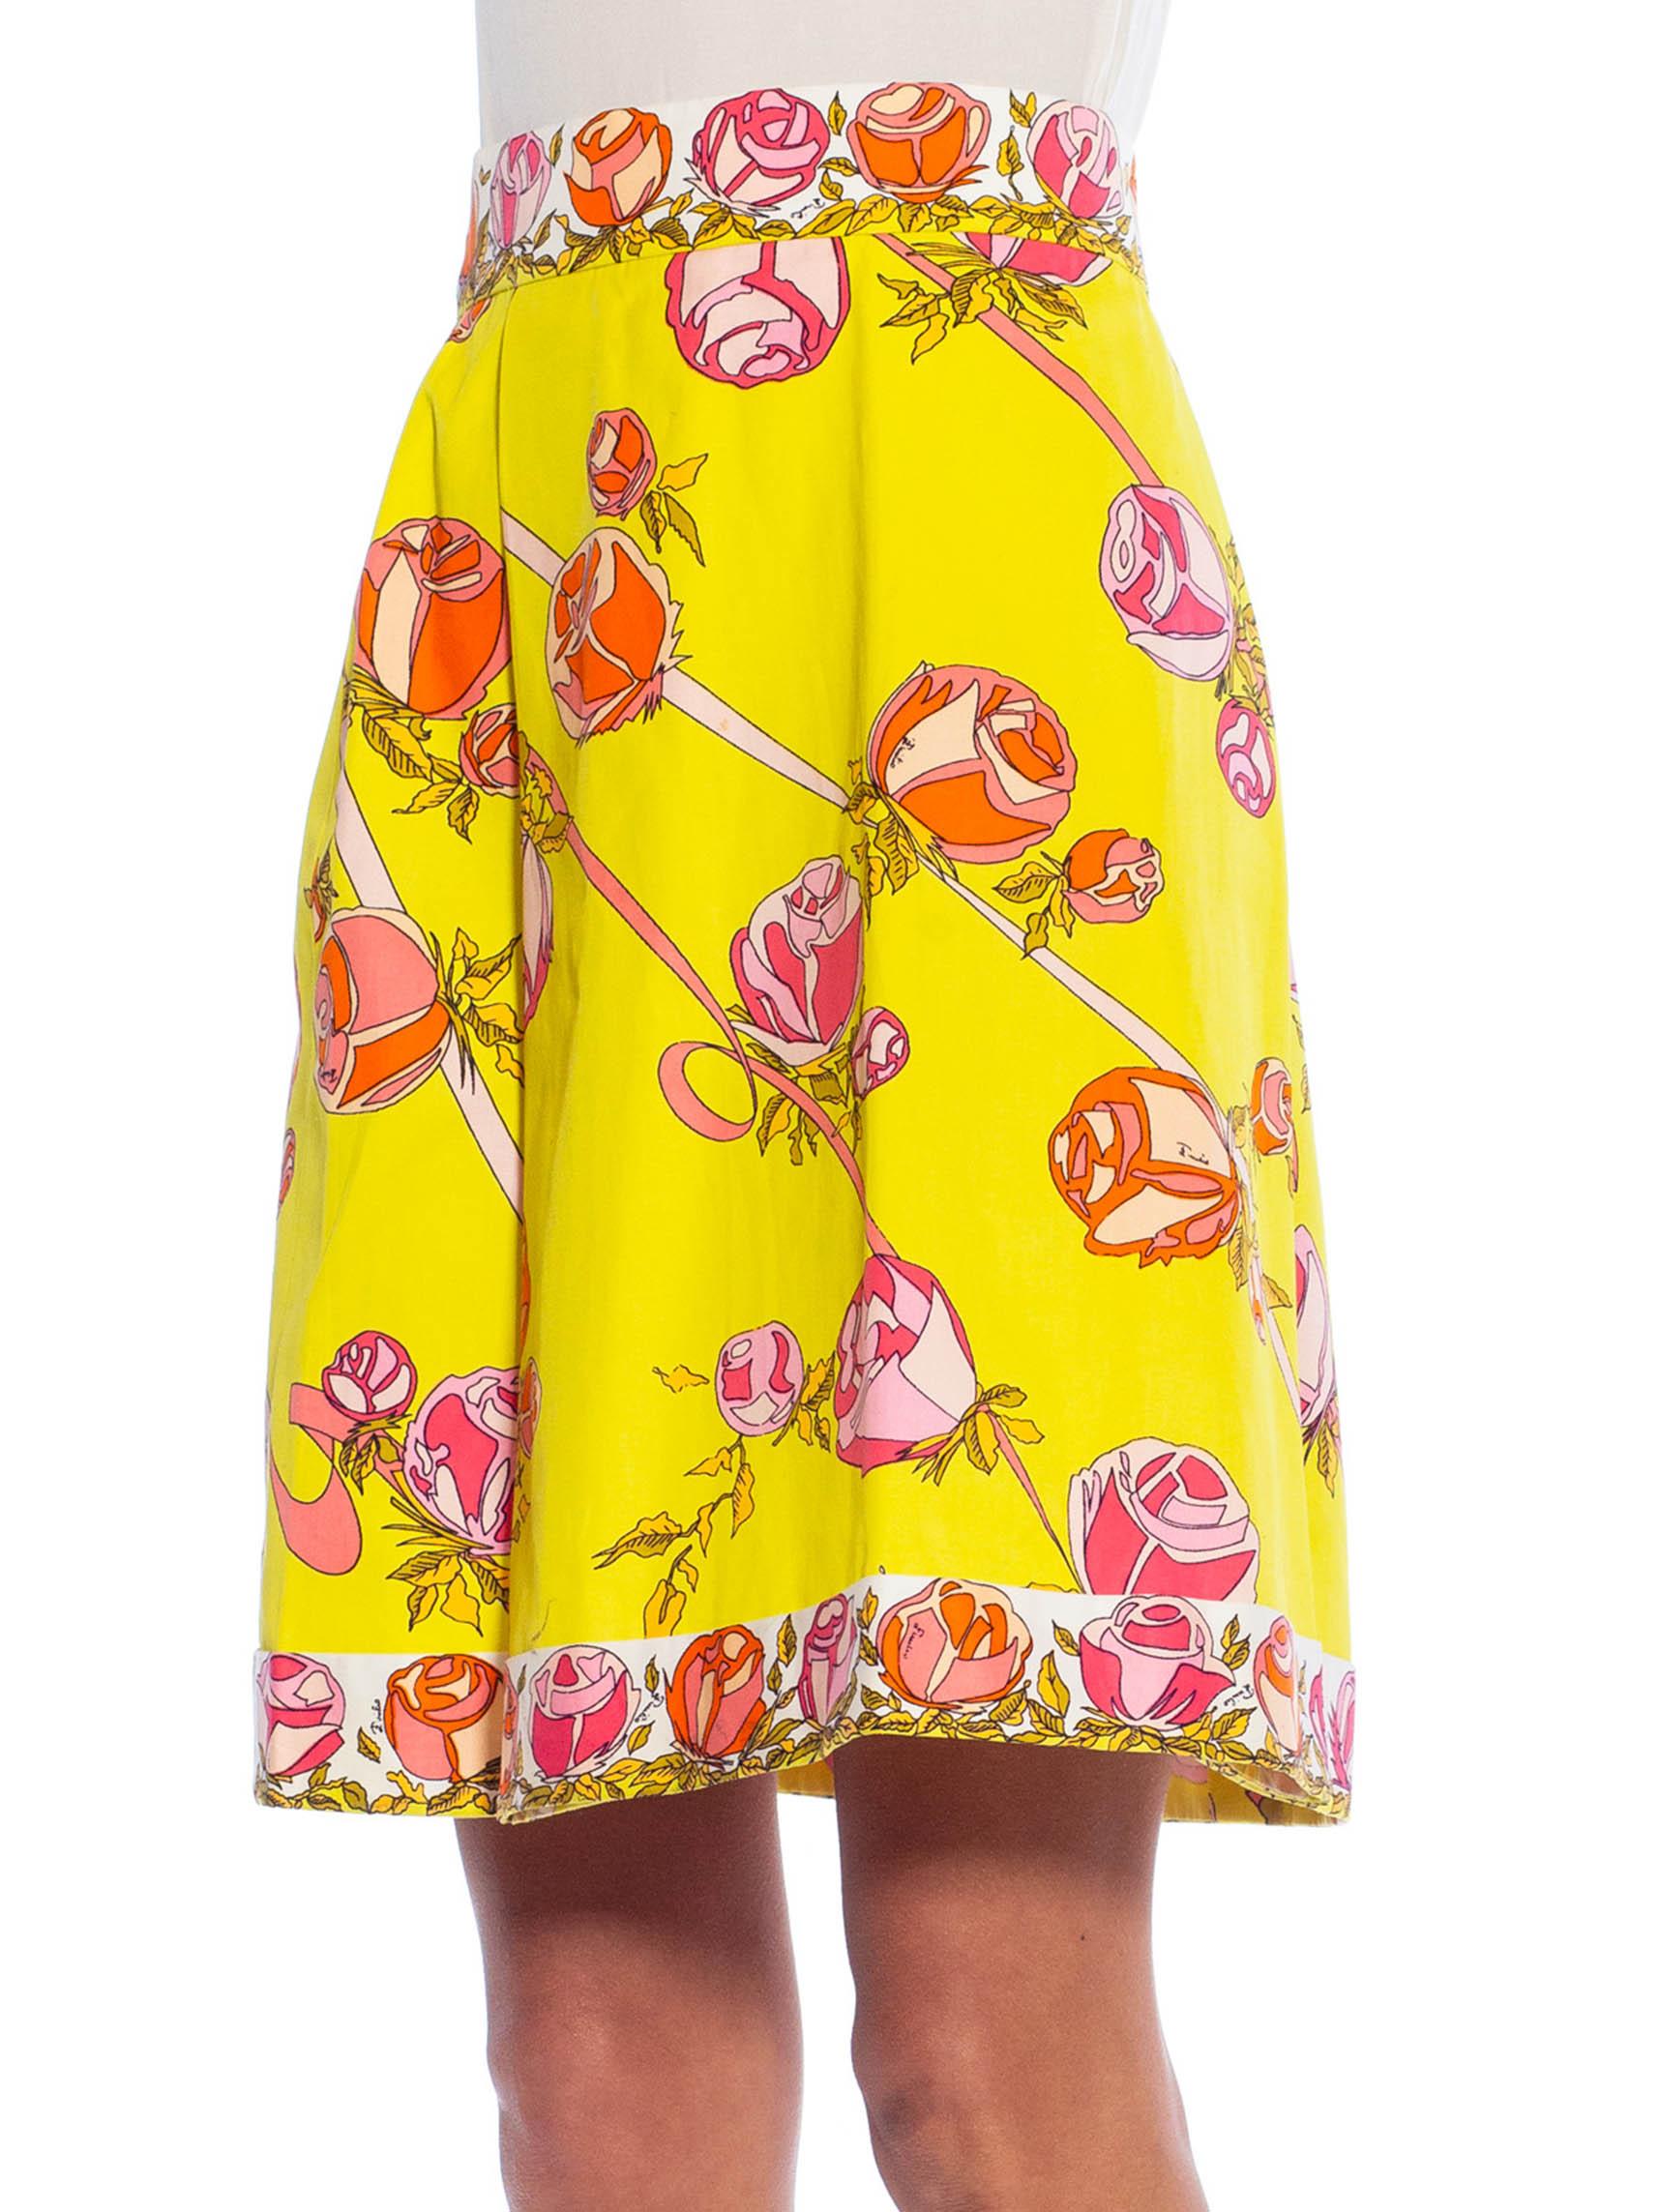 EMILIO PUCCI Yellow & Pink Cotton Floral Skirt For Sale 2